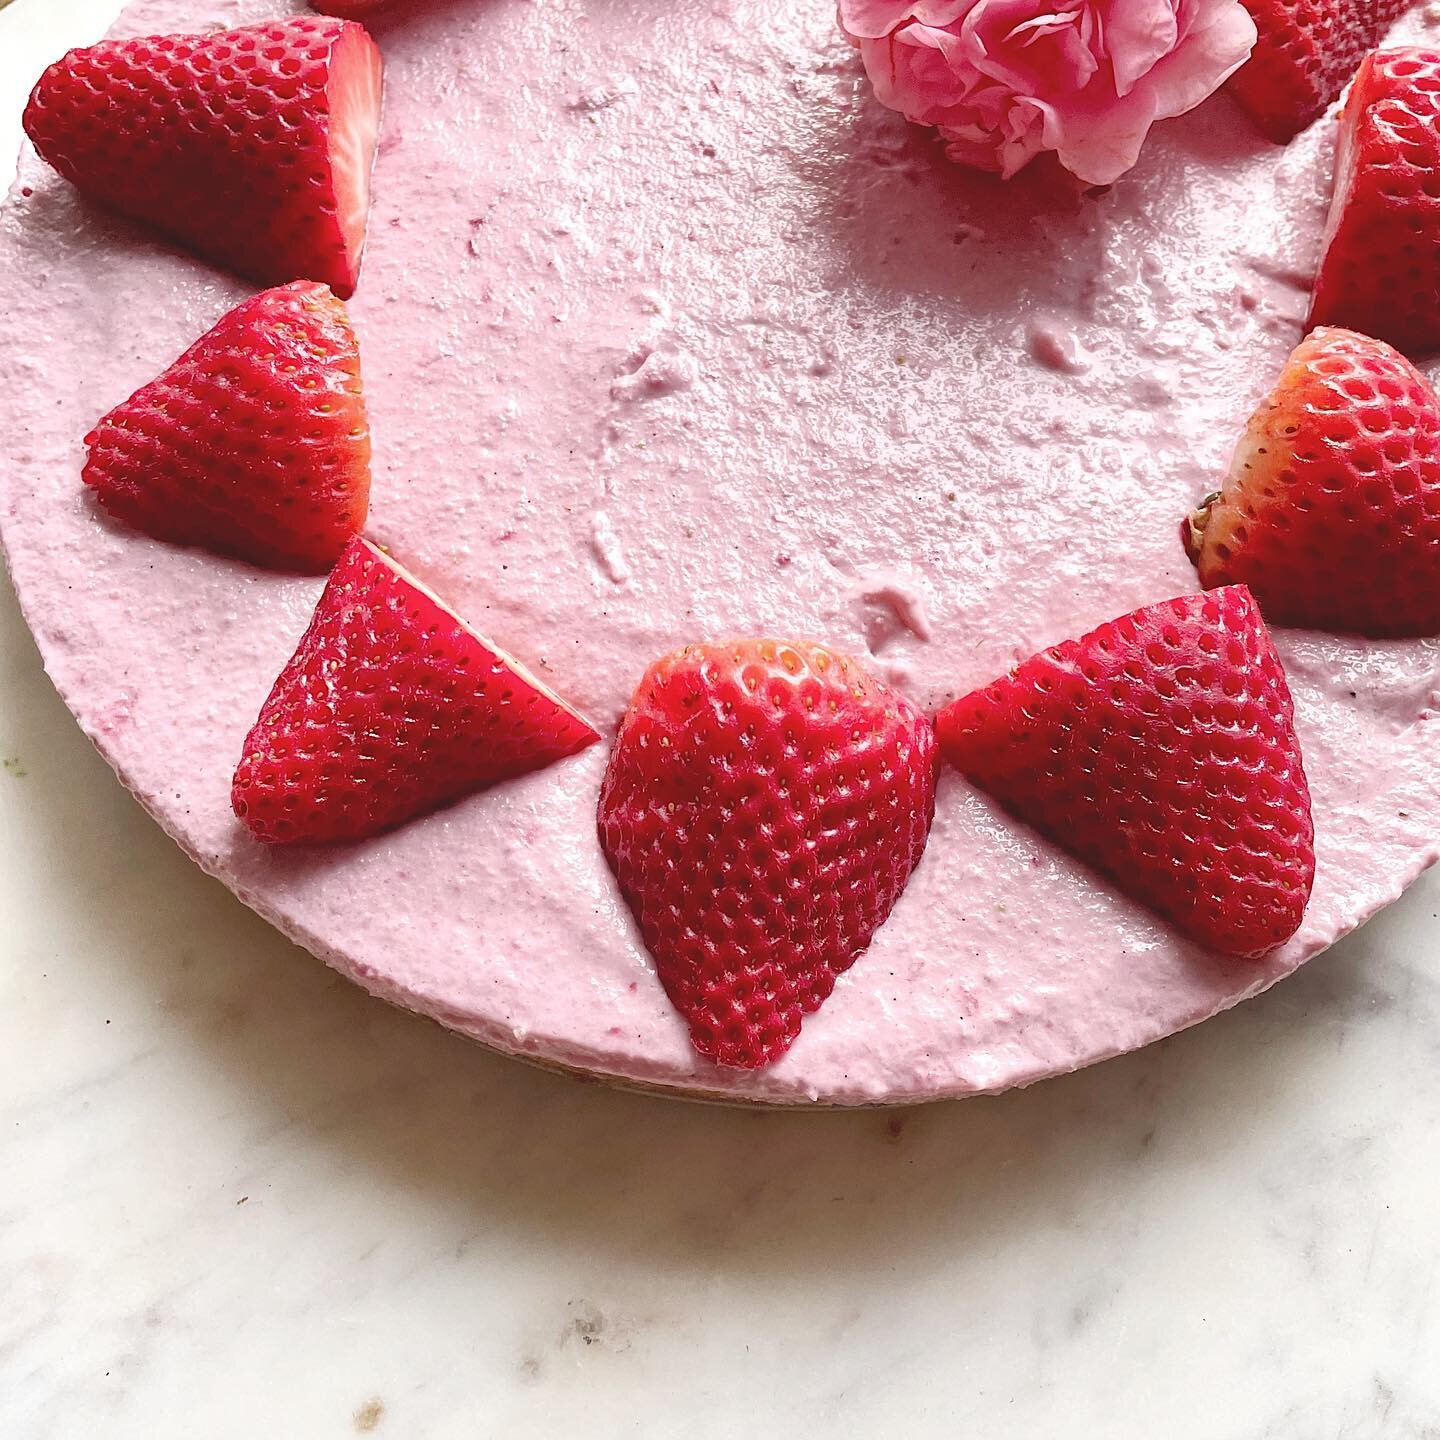 RAW STRAWBERRY CHEESECAKE 💕

GALENTINES DAY (yesterday, February 13th) is my favorite day of the year. I was feeling anxious, sad and overwhelmed, but making this for my roommates helped brighten the best day of the year. This raw strawberry cheesec